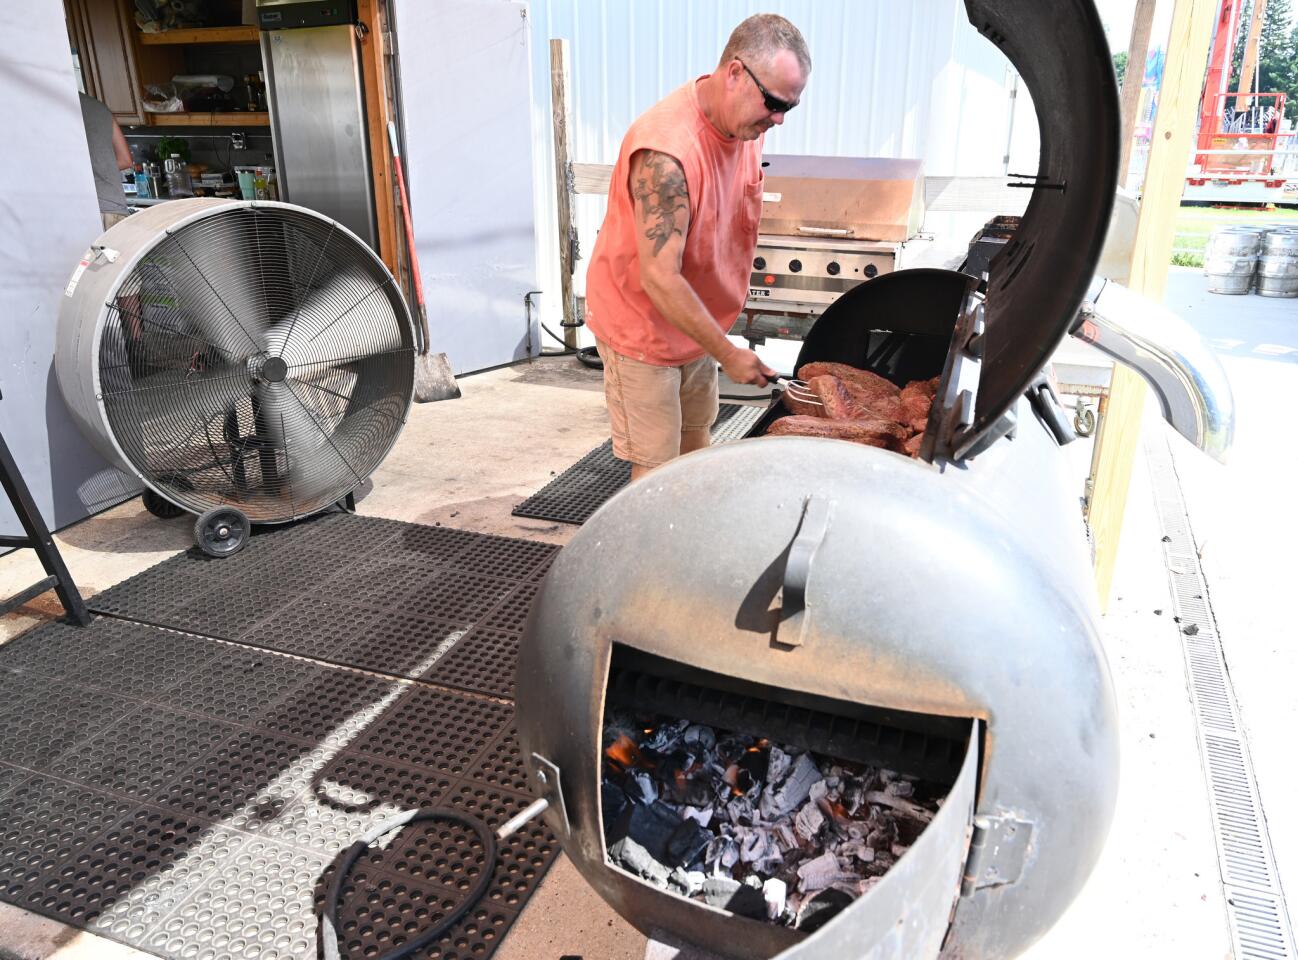 James Haschert deals with the added heat of cooking pit beef on grills near 300 degrees, on top of the near 100 degree temperatures near the opening (4pm) of Reese carnival on Saturday, July 20.